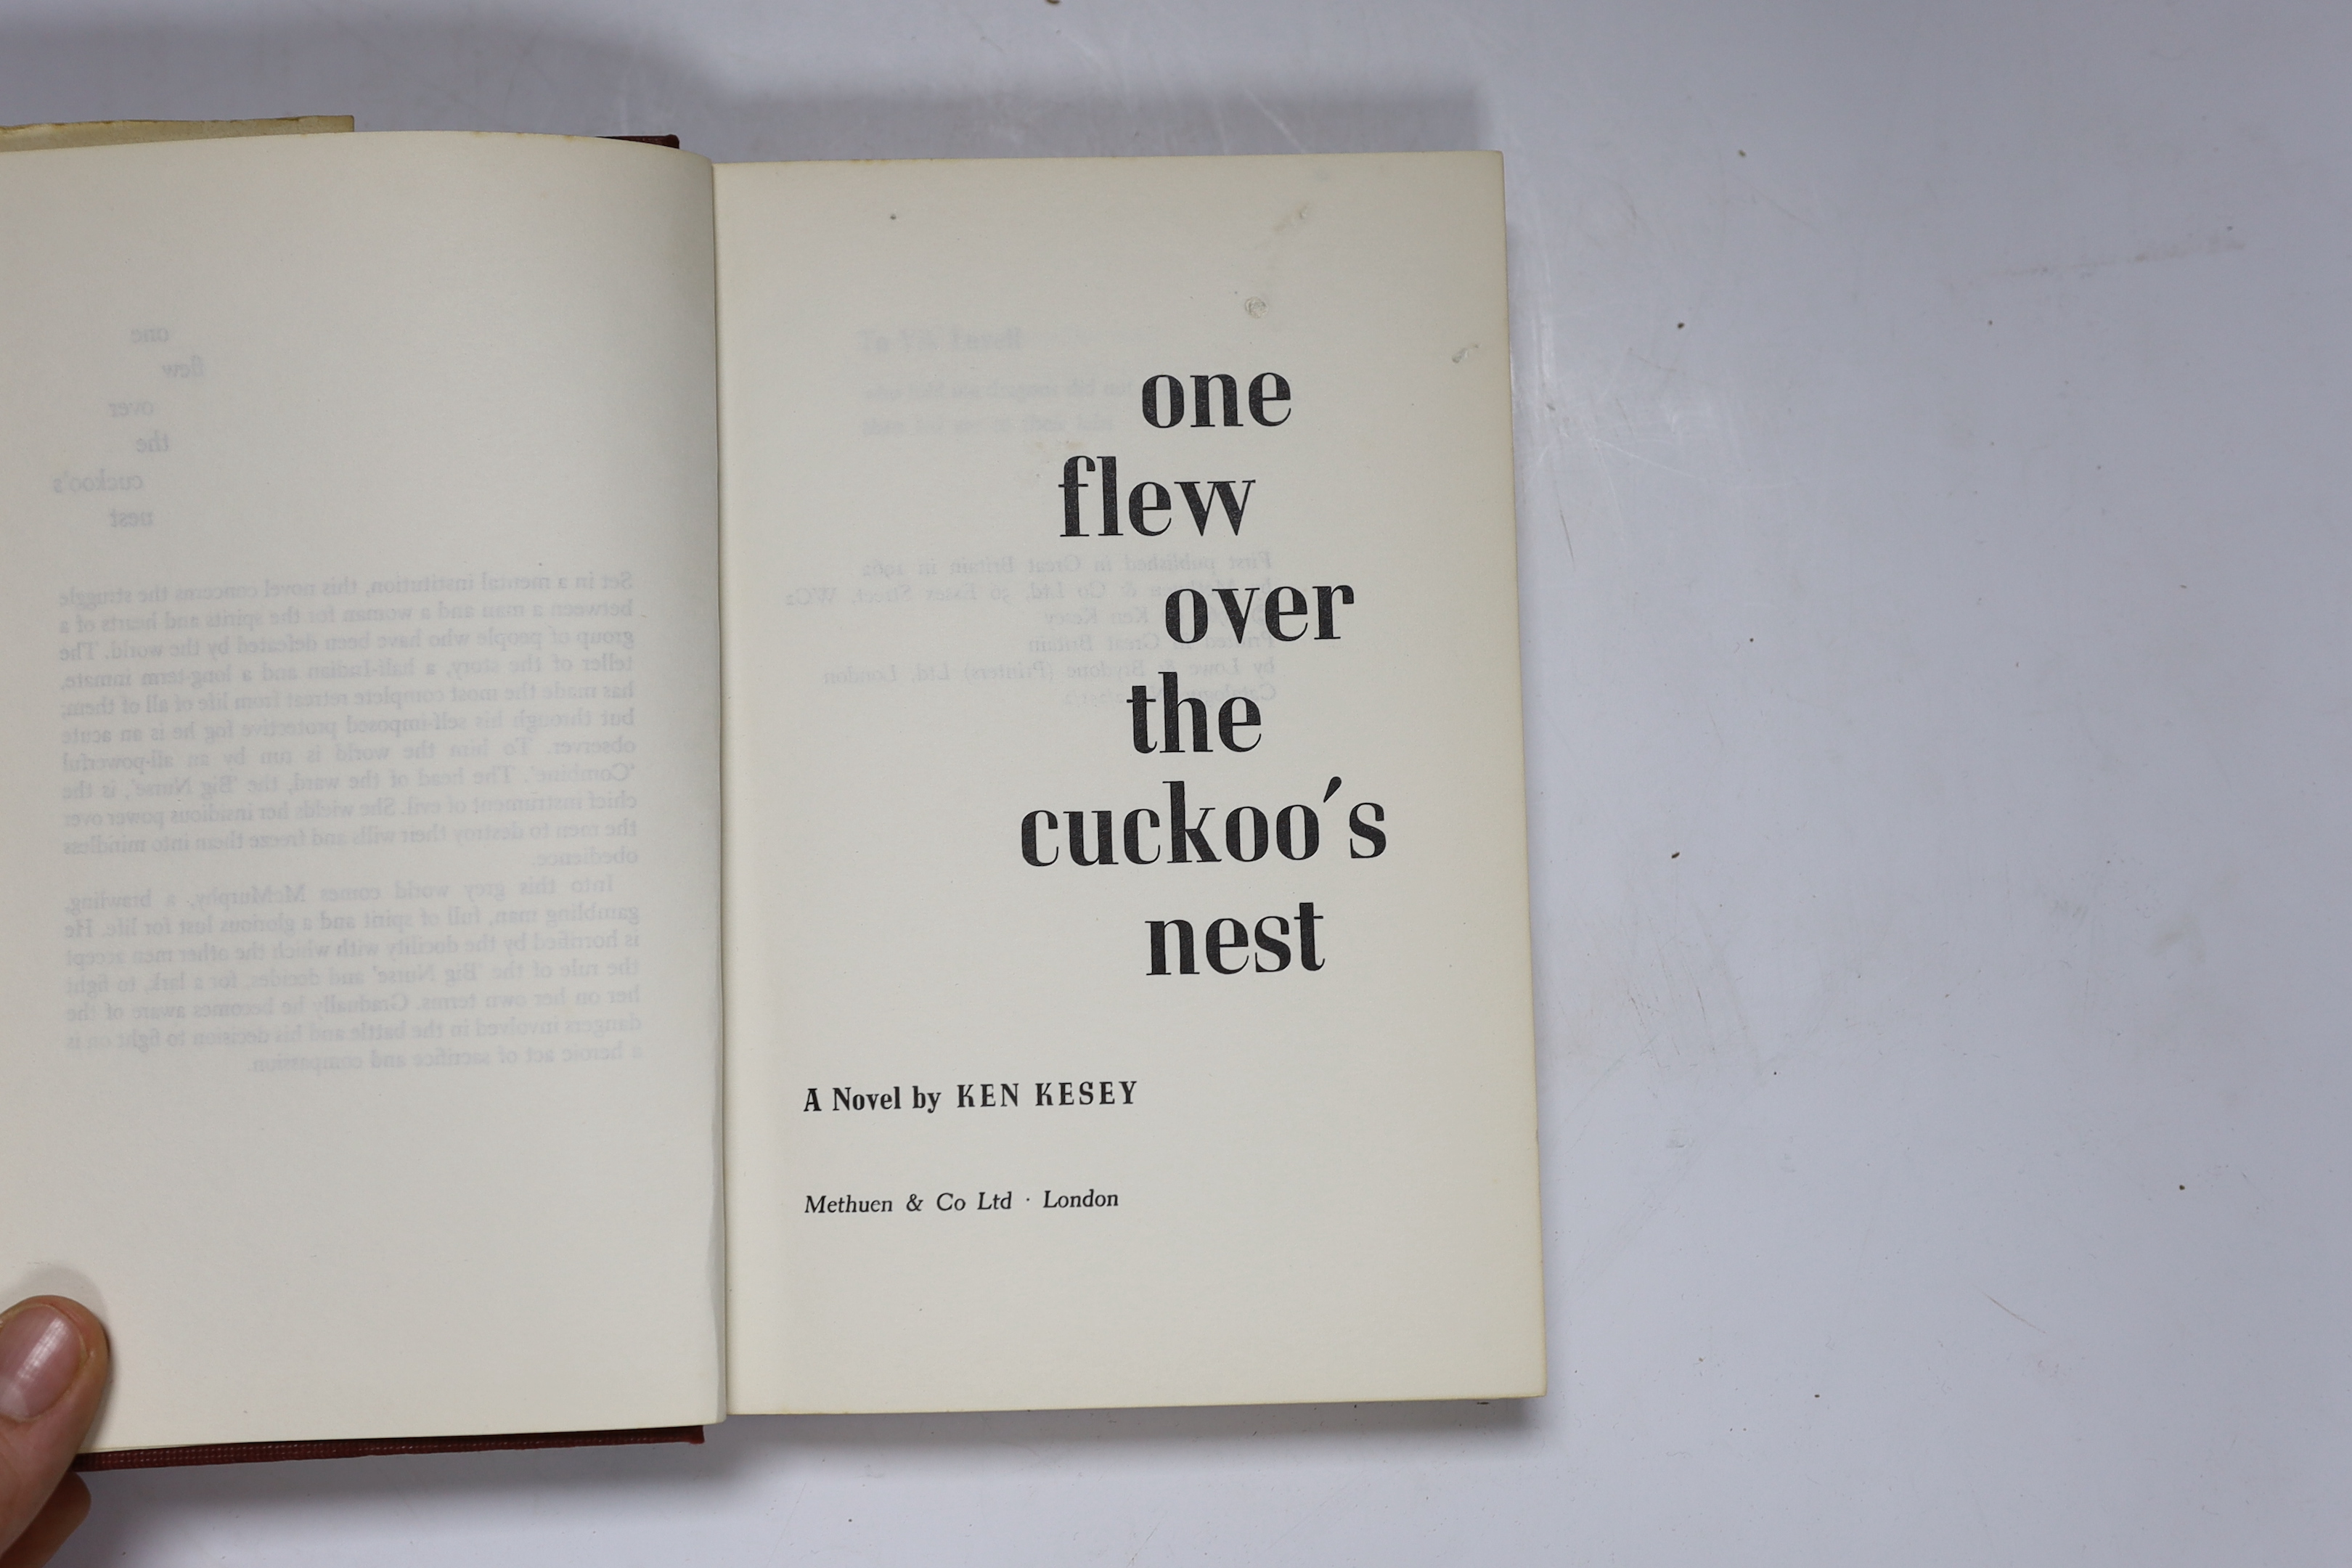 Kesey, Ken - One Flew Over the Cuckoo's Nest ... 1st English Edition. half title; publisher's cloth and d/wrapper. Author’s name not blacked on copyright page, which normally the case, 1962; Donleavy, J.P. - A Singular M